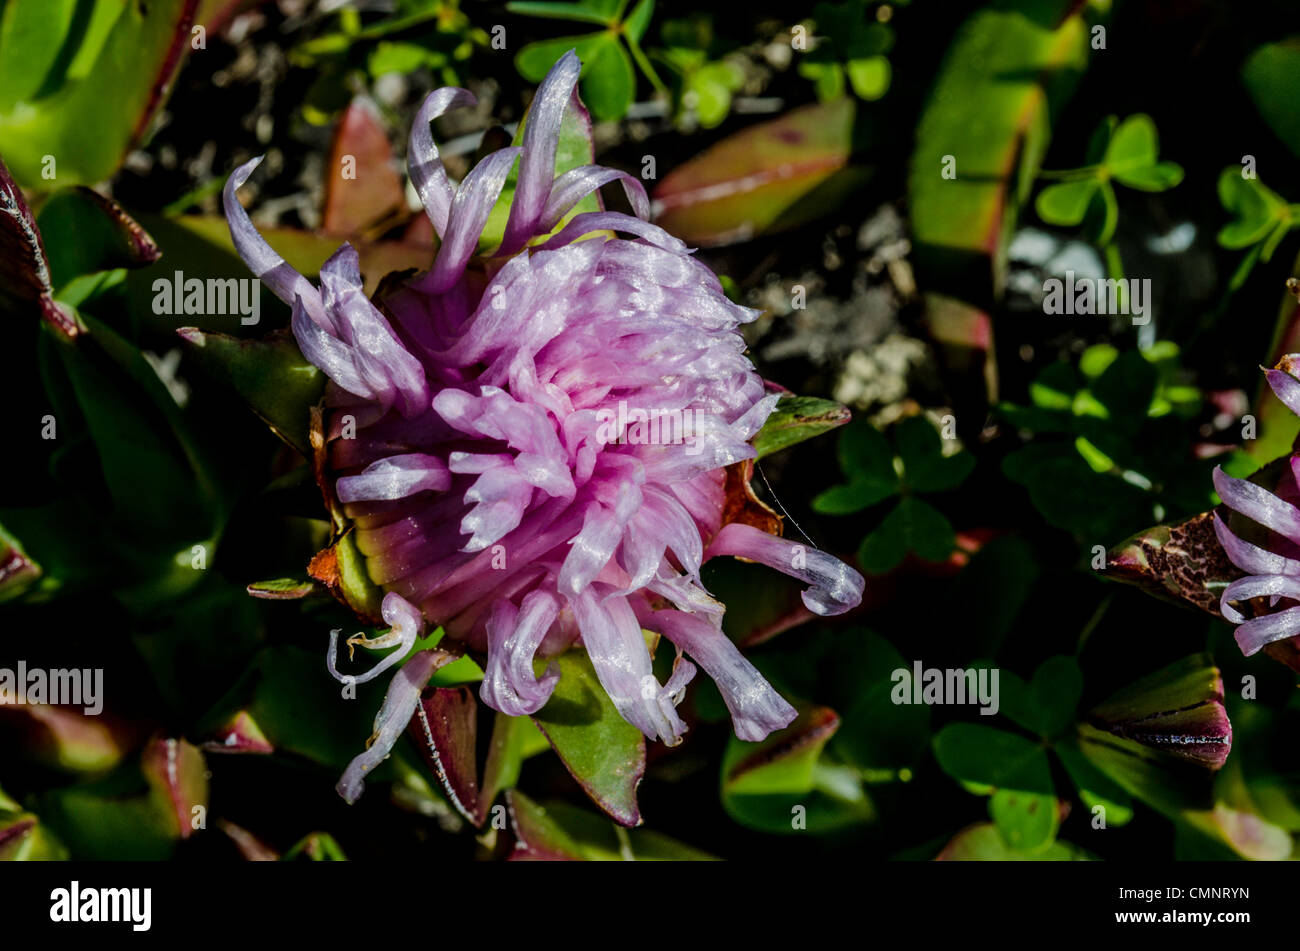 Ice plant flower blooming. Stock Photo